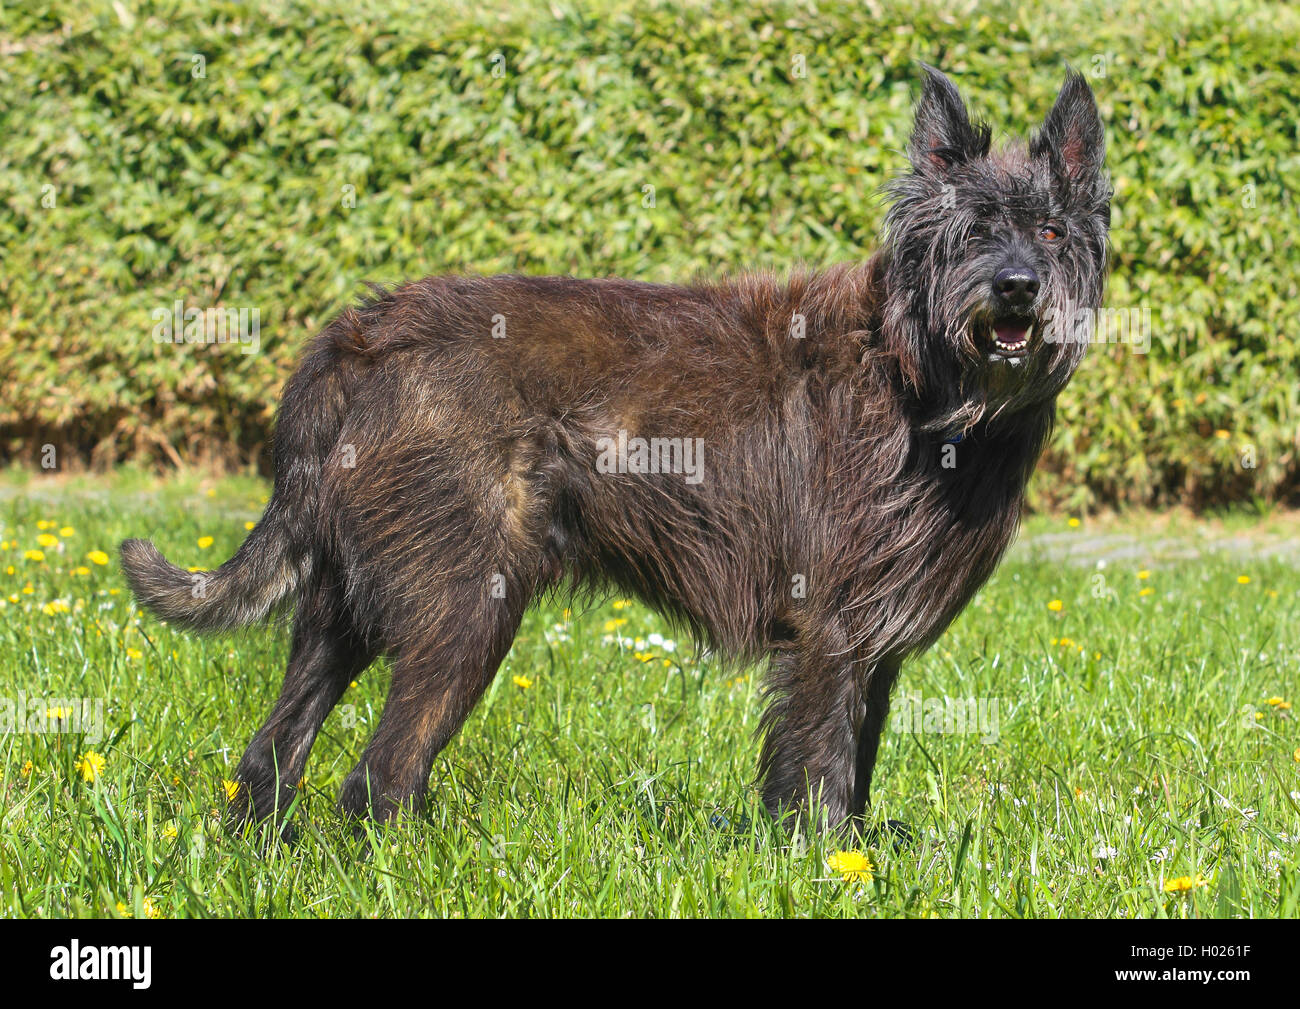 Berger de Picardie, Berger Picard (Canis lupus f. familiaris), seven years old male dog standing in a meadow, Germany Stock Photo